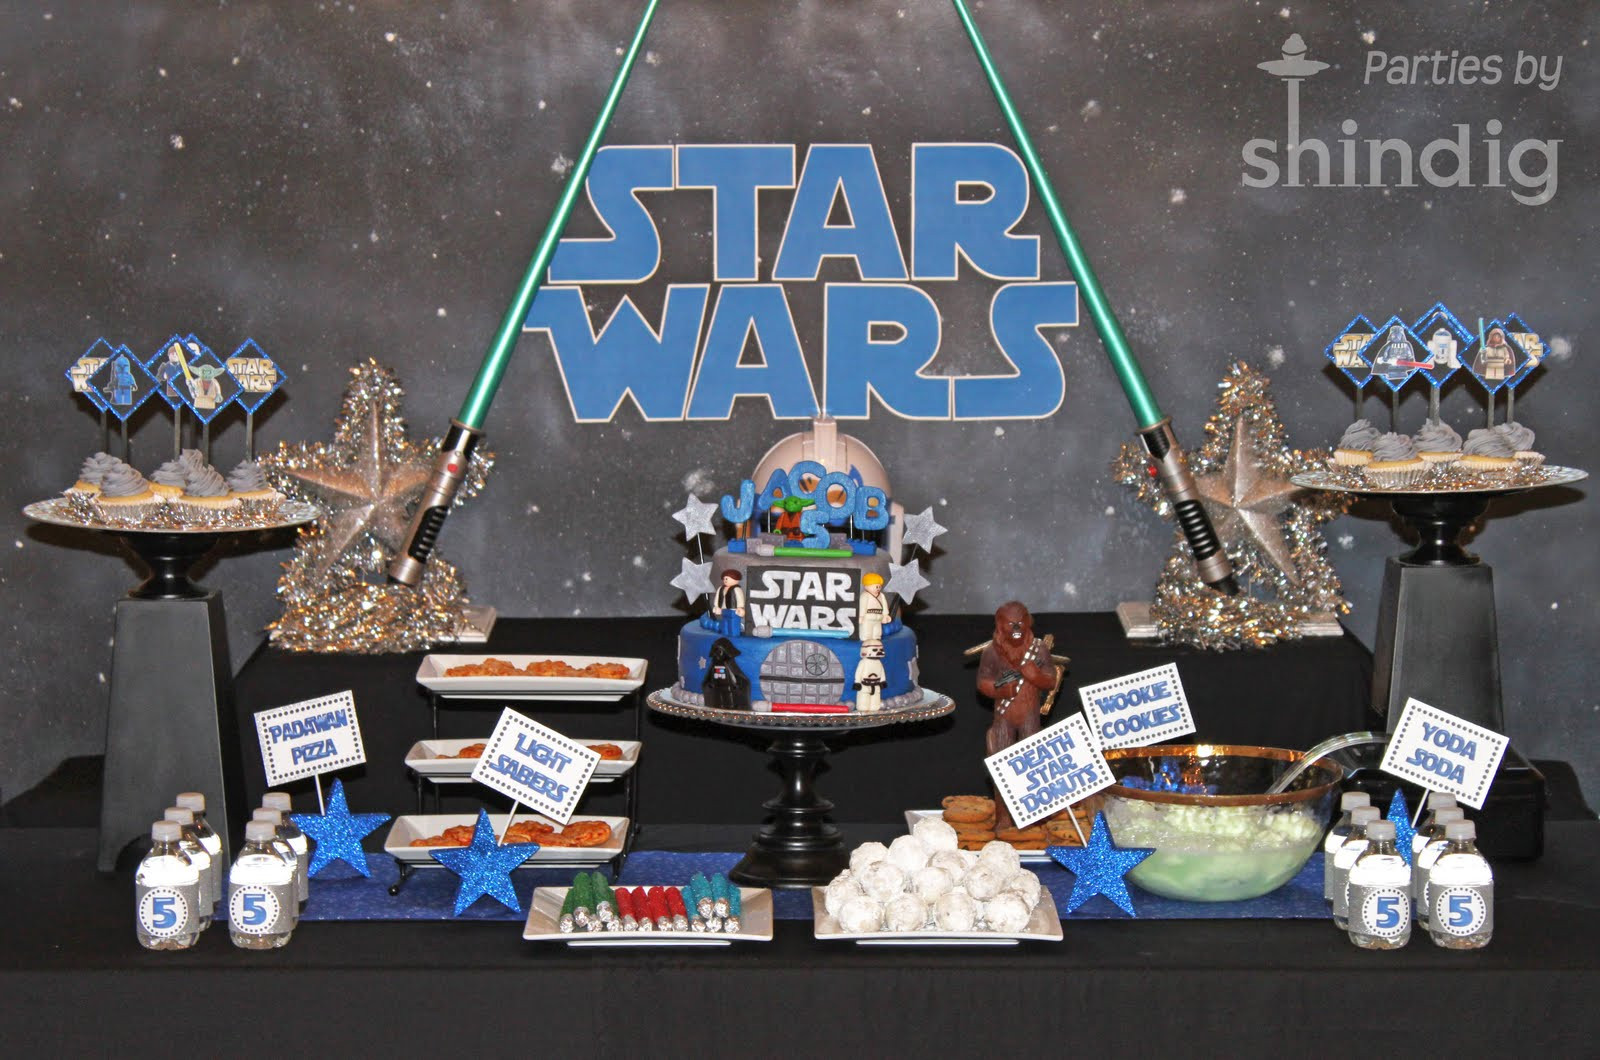 Star Wars Birthday Party Supplies
 Amanda s Parties To Go Star Wars Party Details